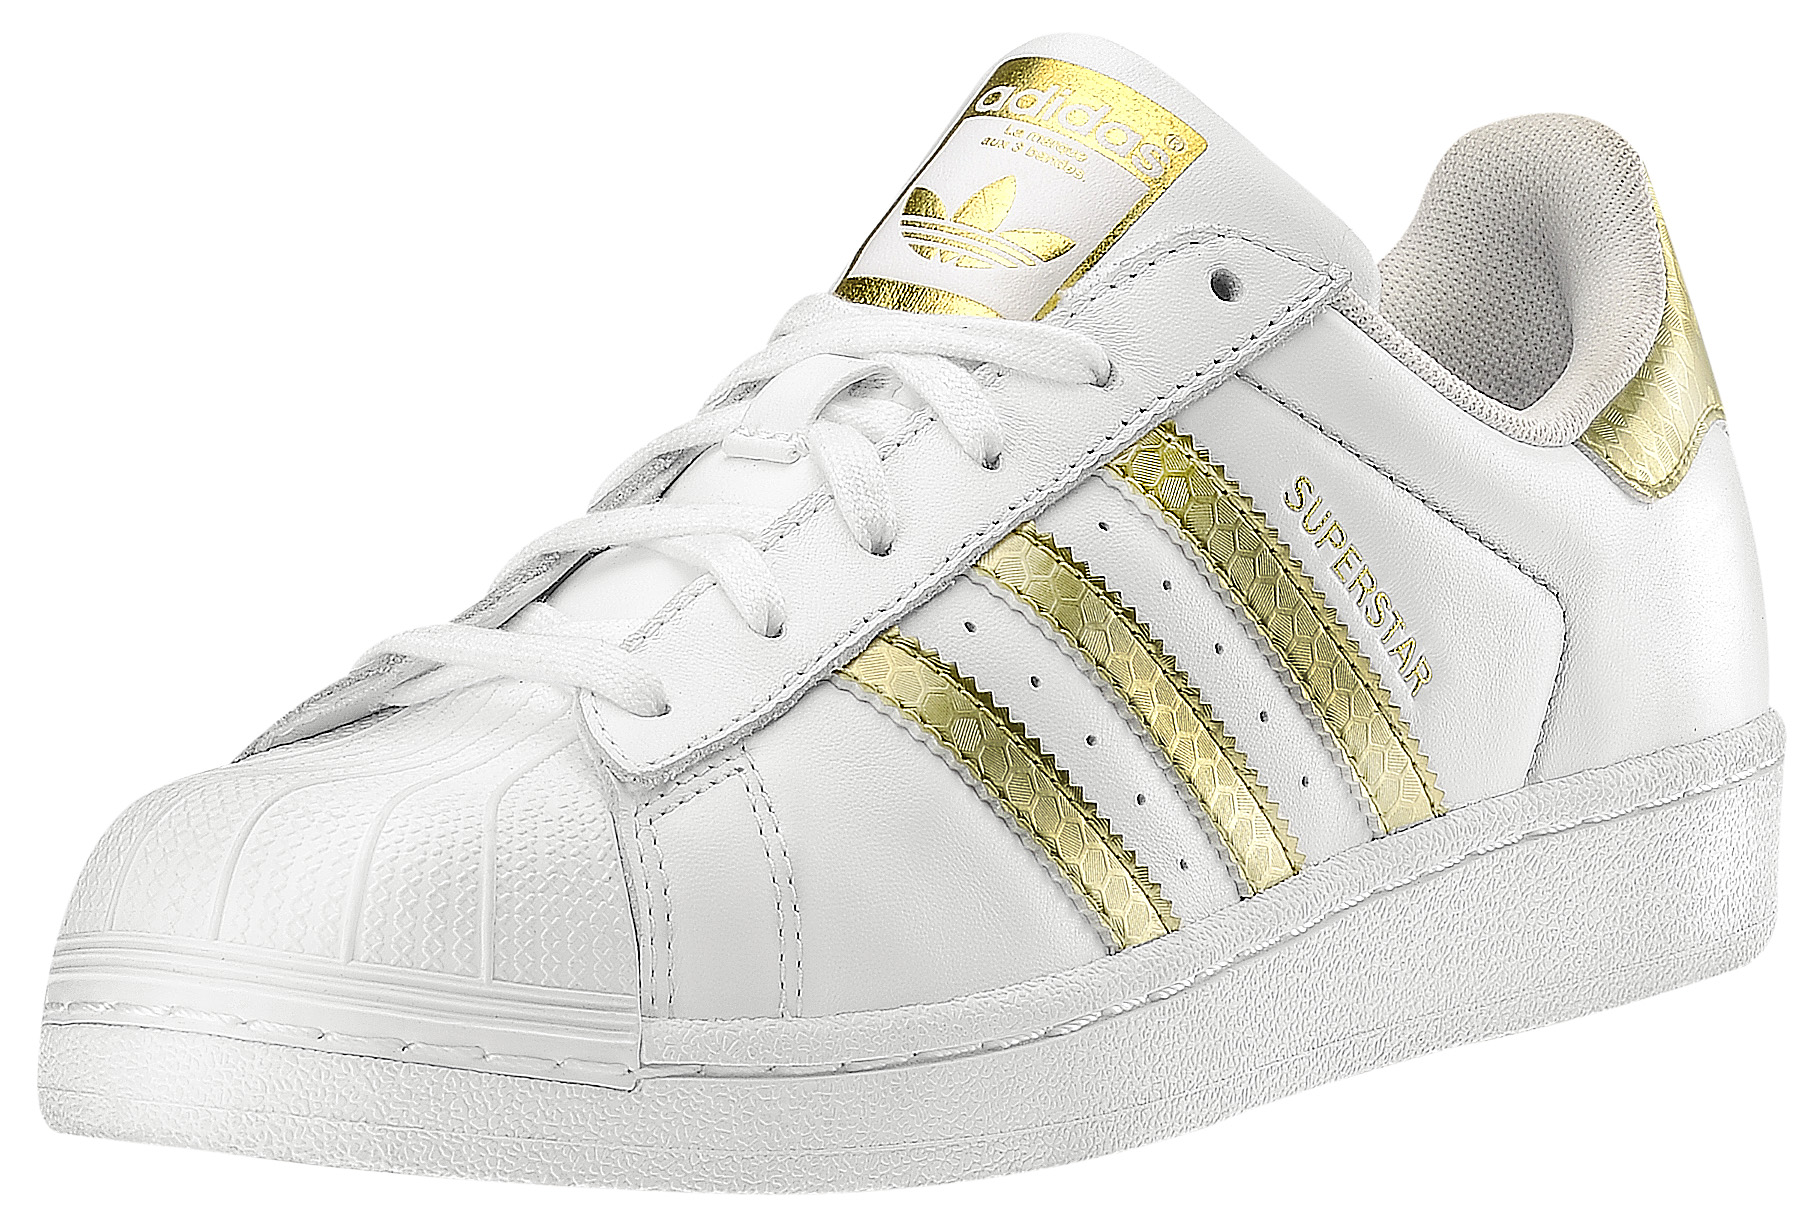 Adidas Superstar Shine Collection per AW LAB